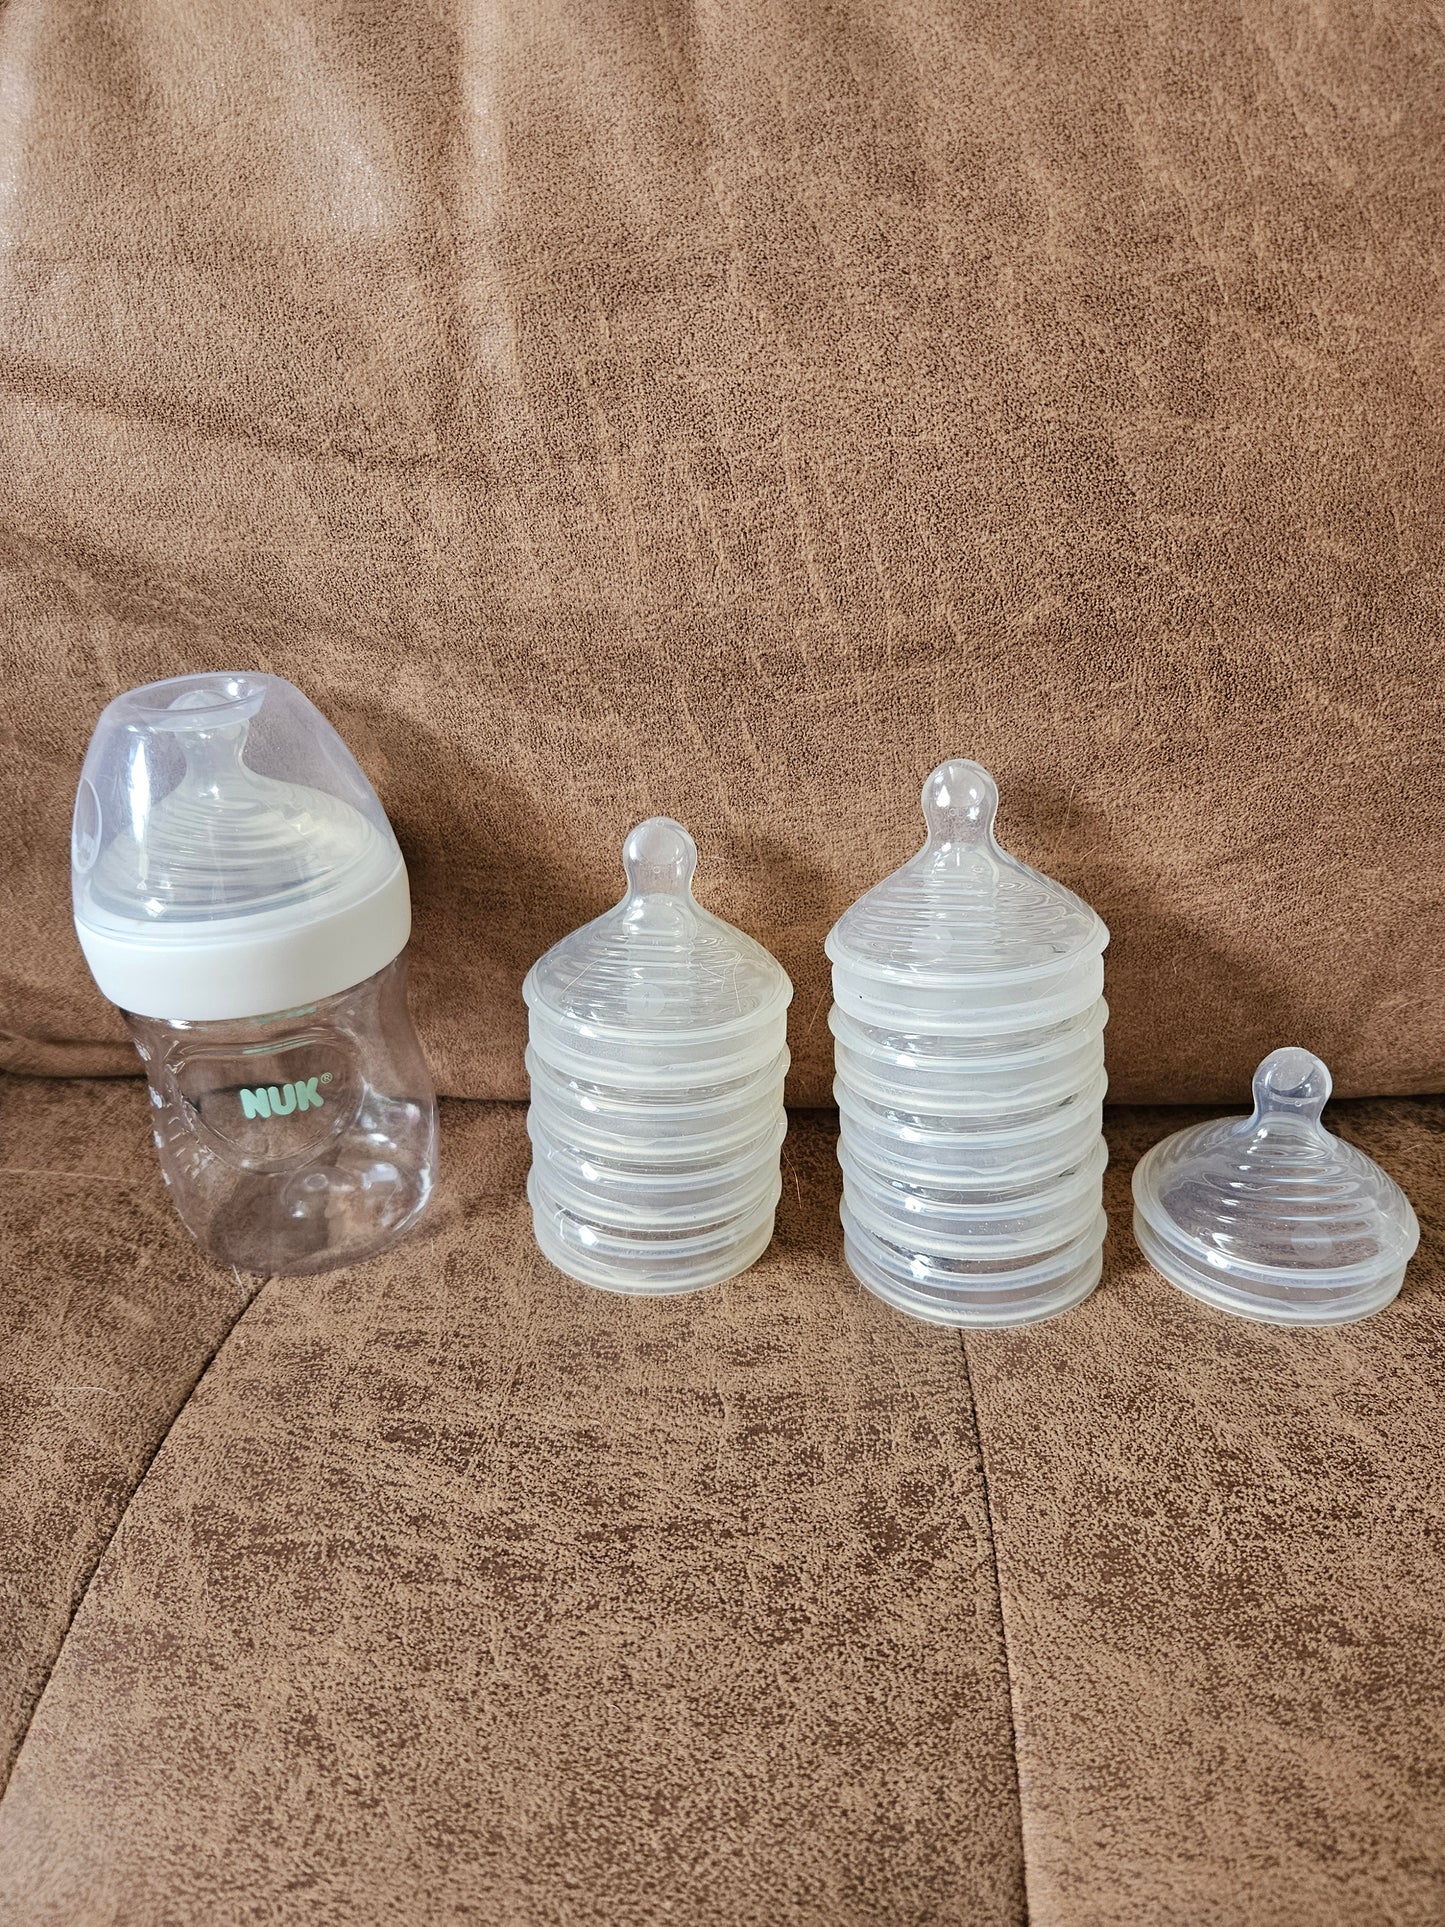 *REDUCED: NUK Simply Natural 1 bottle and nipple set